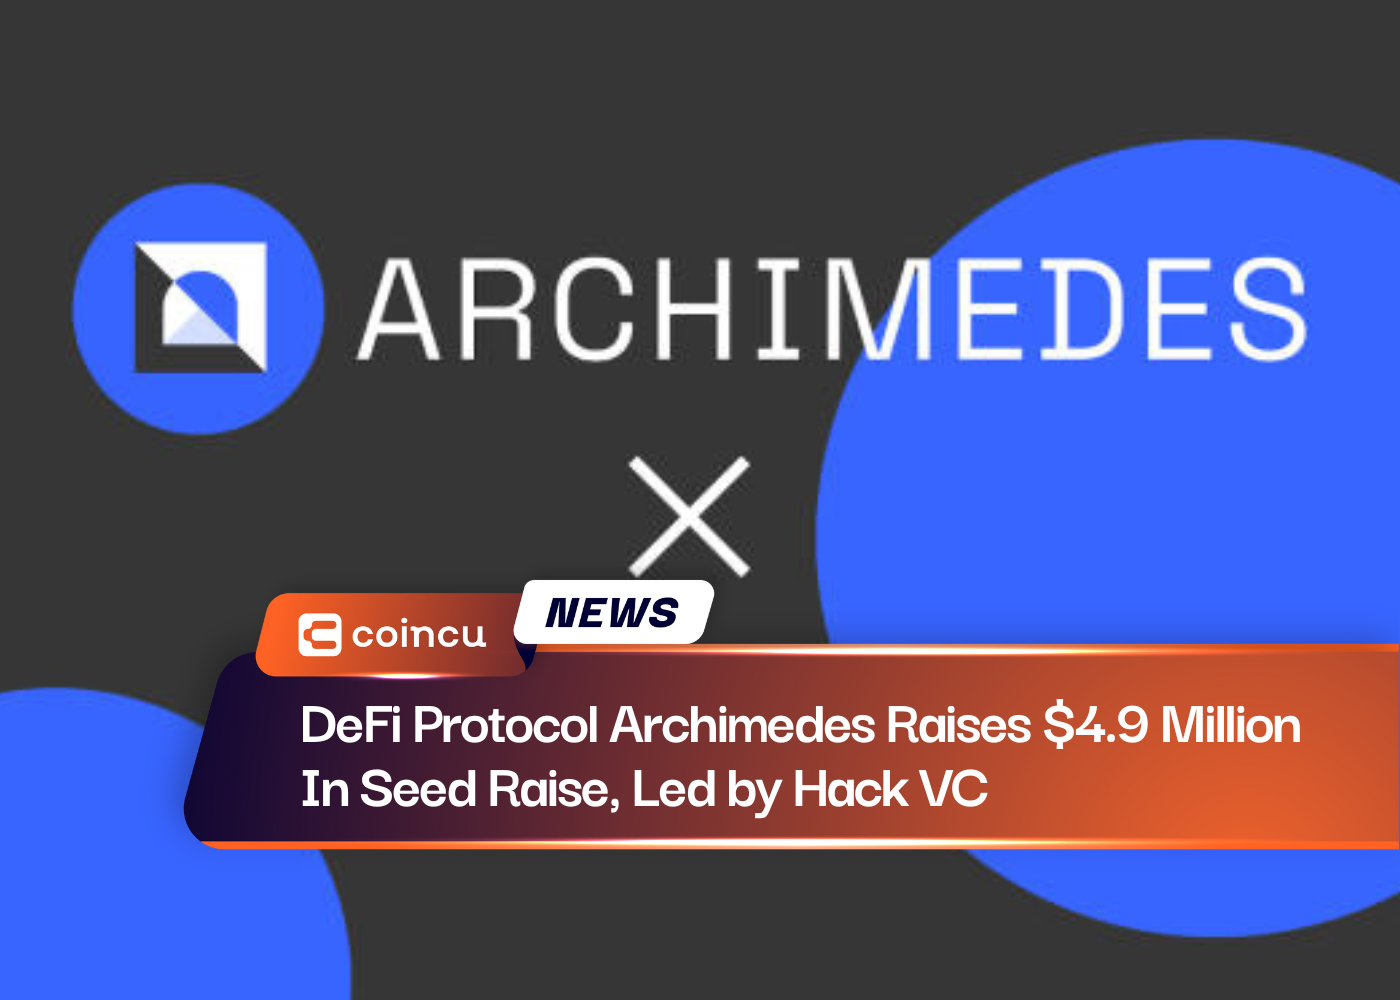 DeFi Protocol Archimedes Raises $4.9 Million In Seed Raise, Led by Hack VC